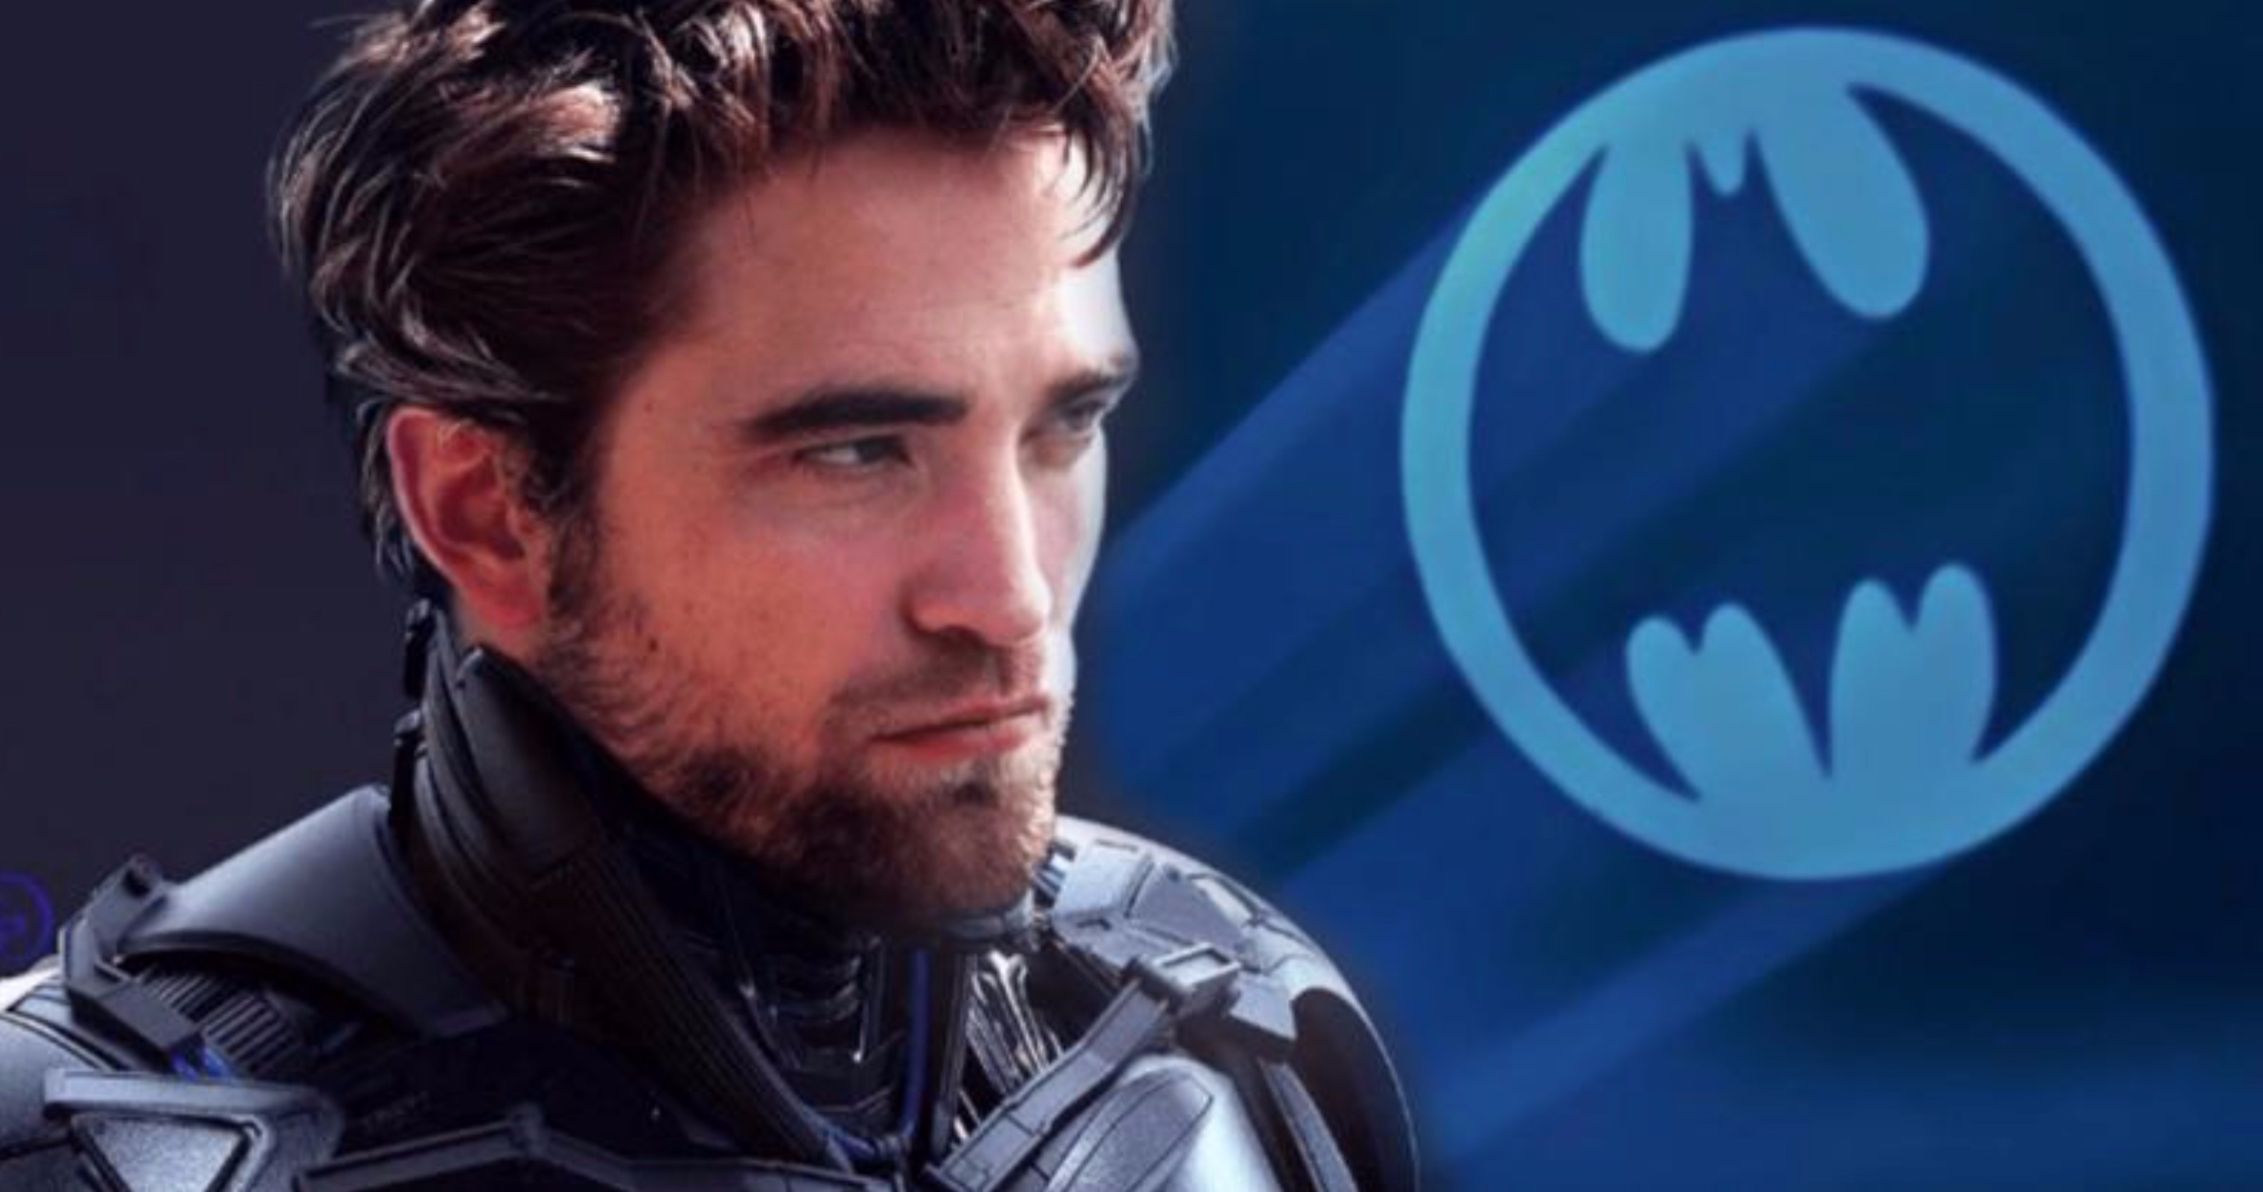 Why The Batman Is the Right Superhero Movie to Do According to Robert Pattinson